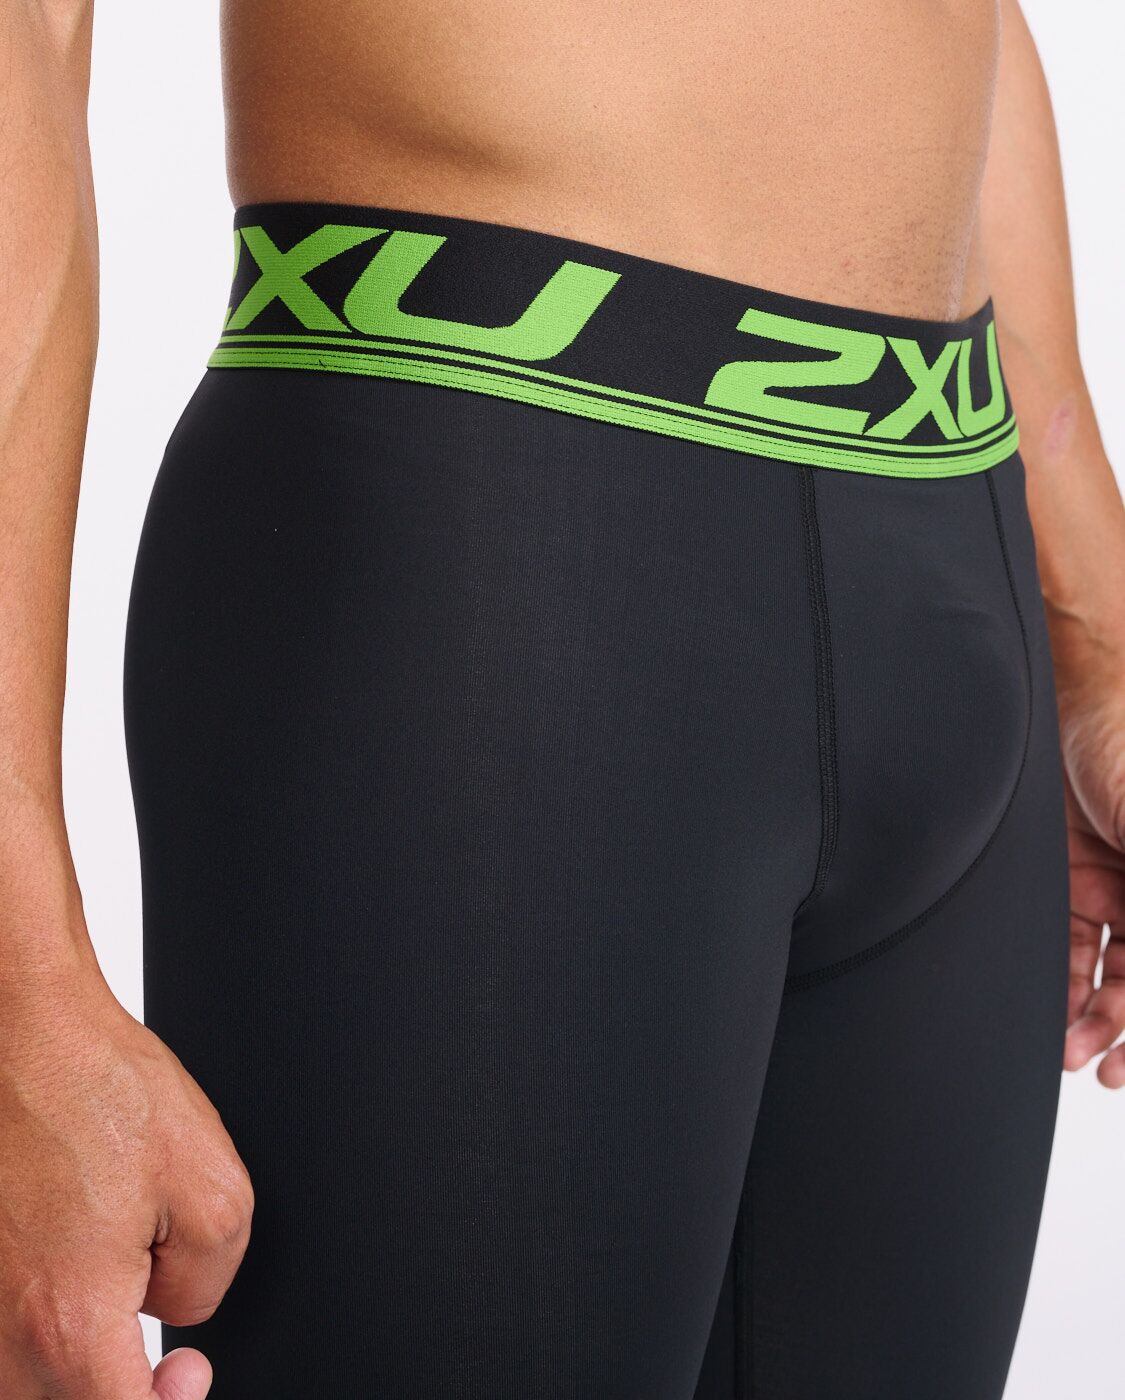  2XU Women's Elite Power Recovery Compression Tights,  Black/Nero, Small/Tall : Clothing, Shoes & Jewelry